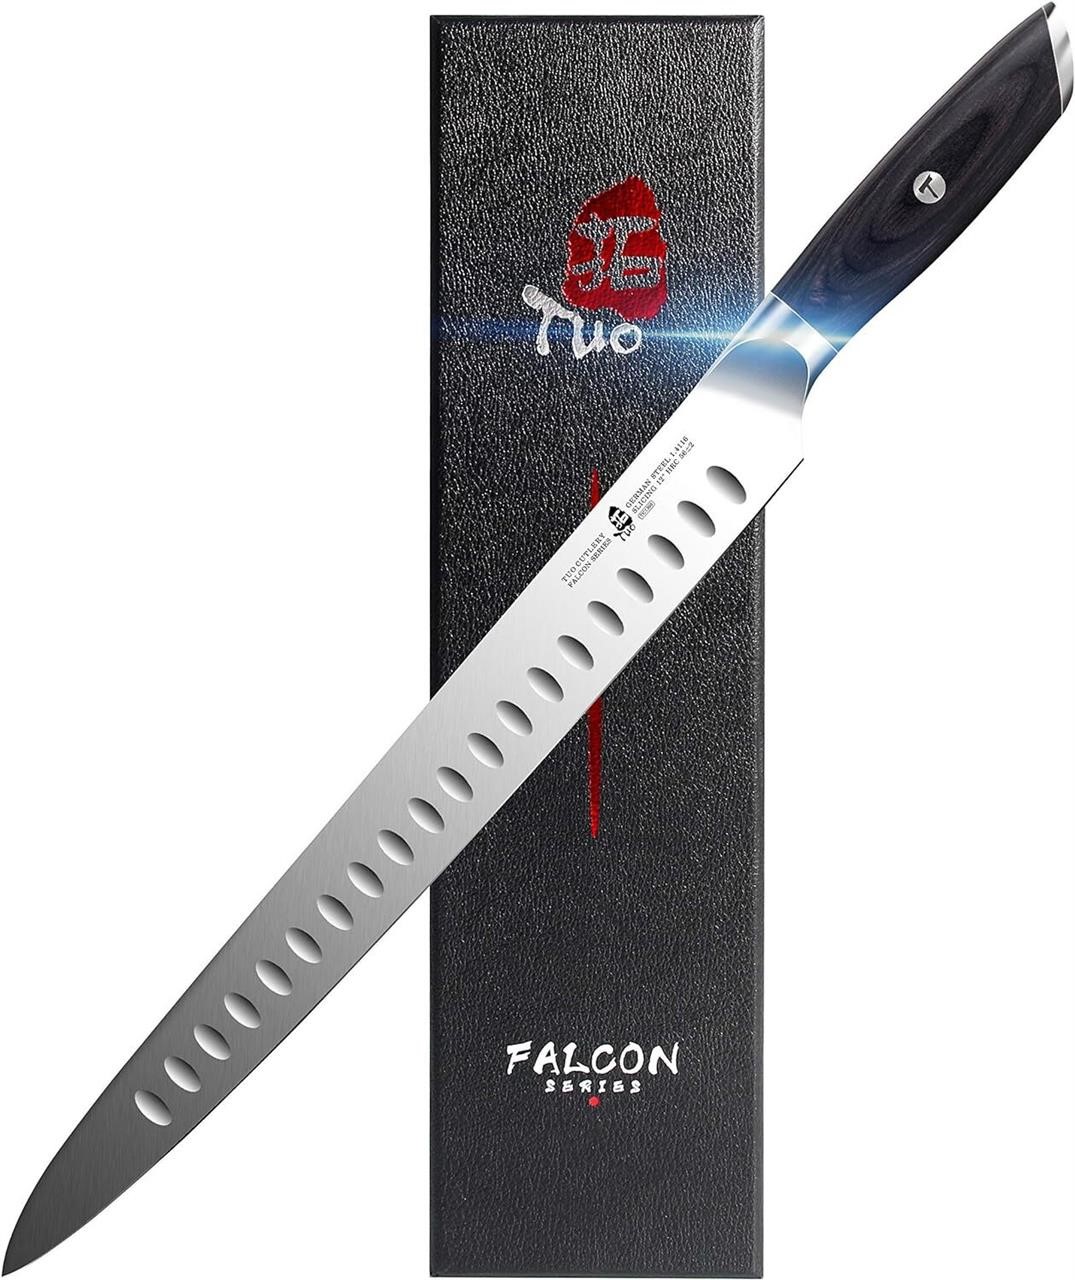 12-inch TUO Slicing Carving Knife - Black Phoenix